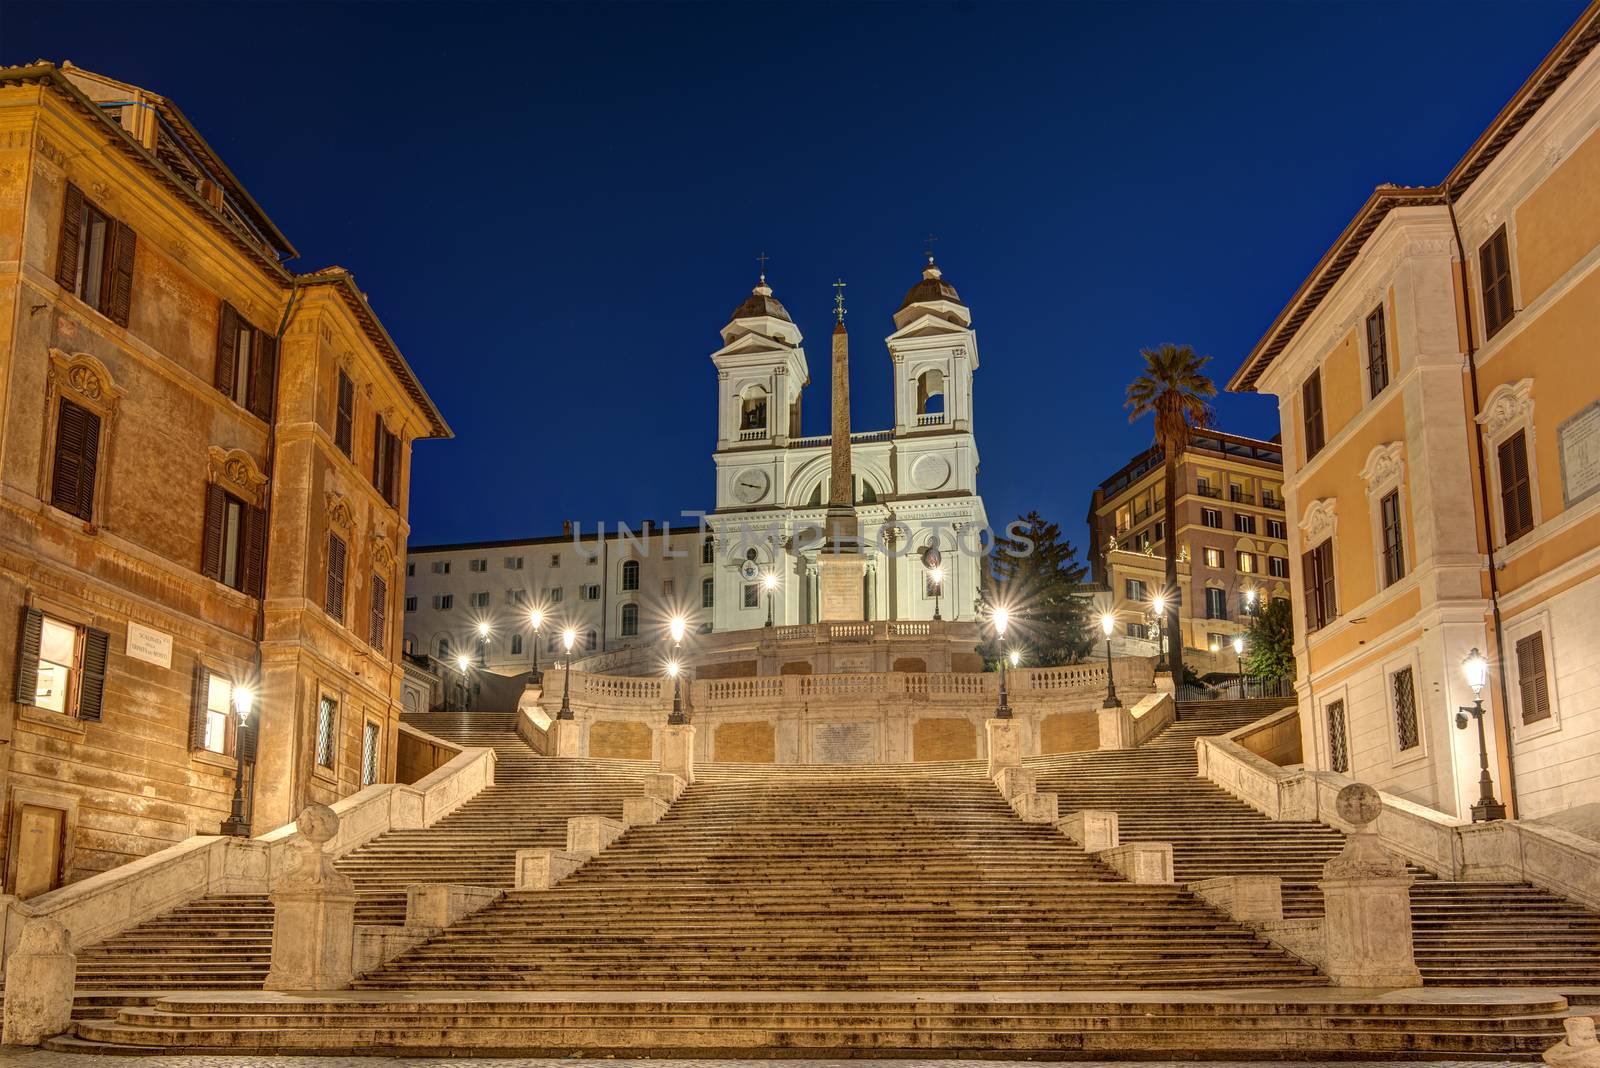 The famous Spanish Steps in Rome at night with no people